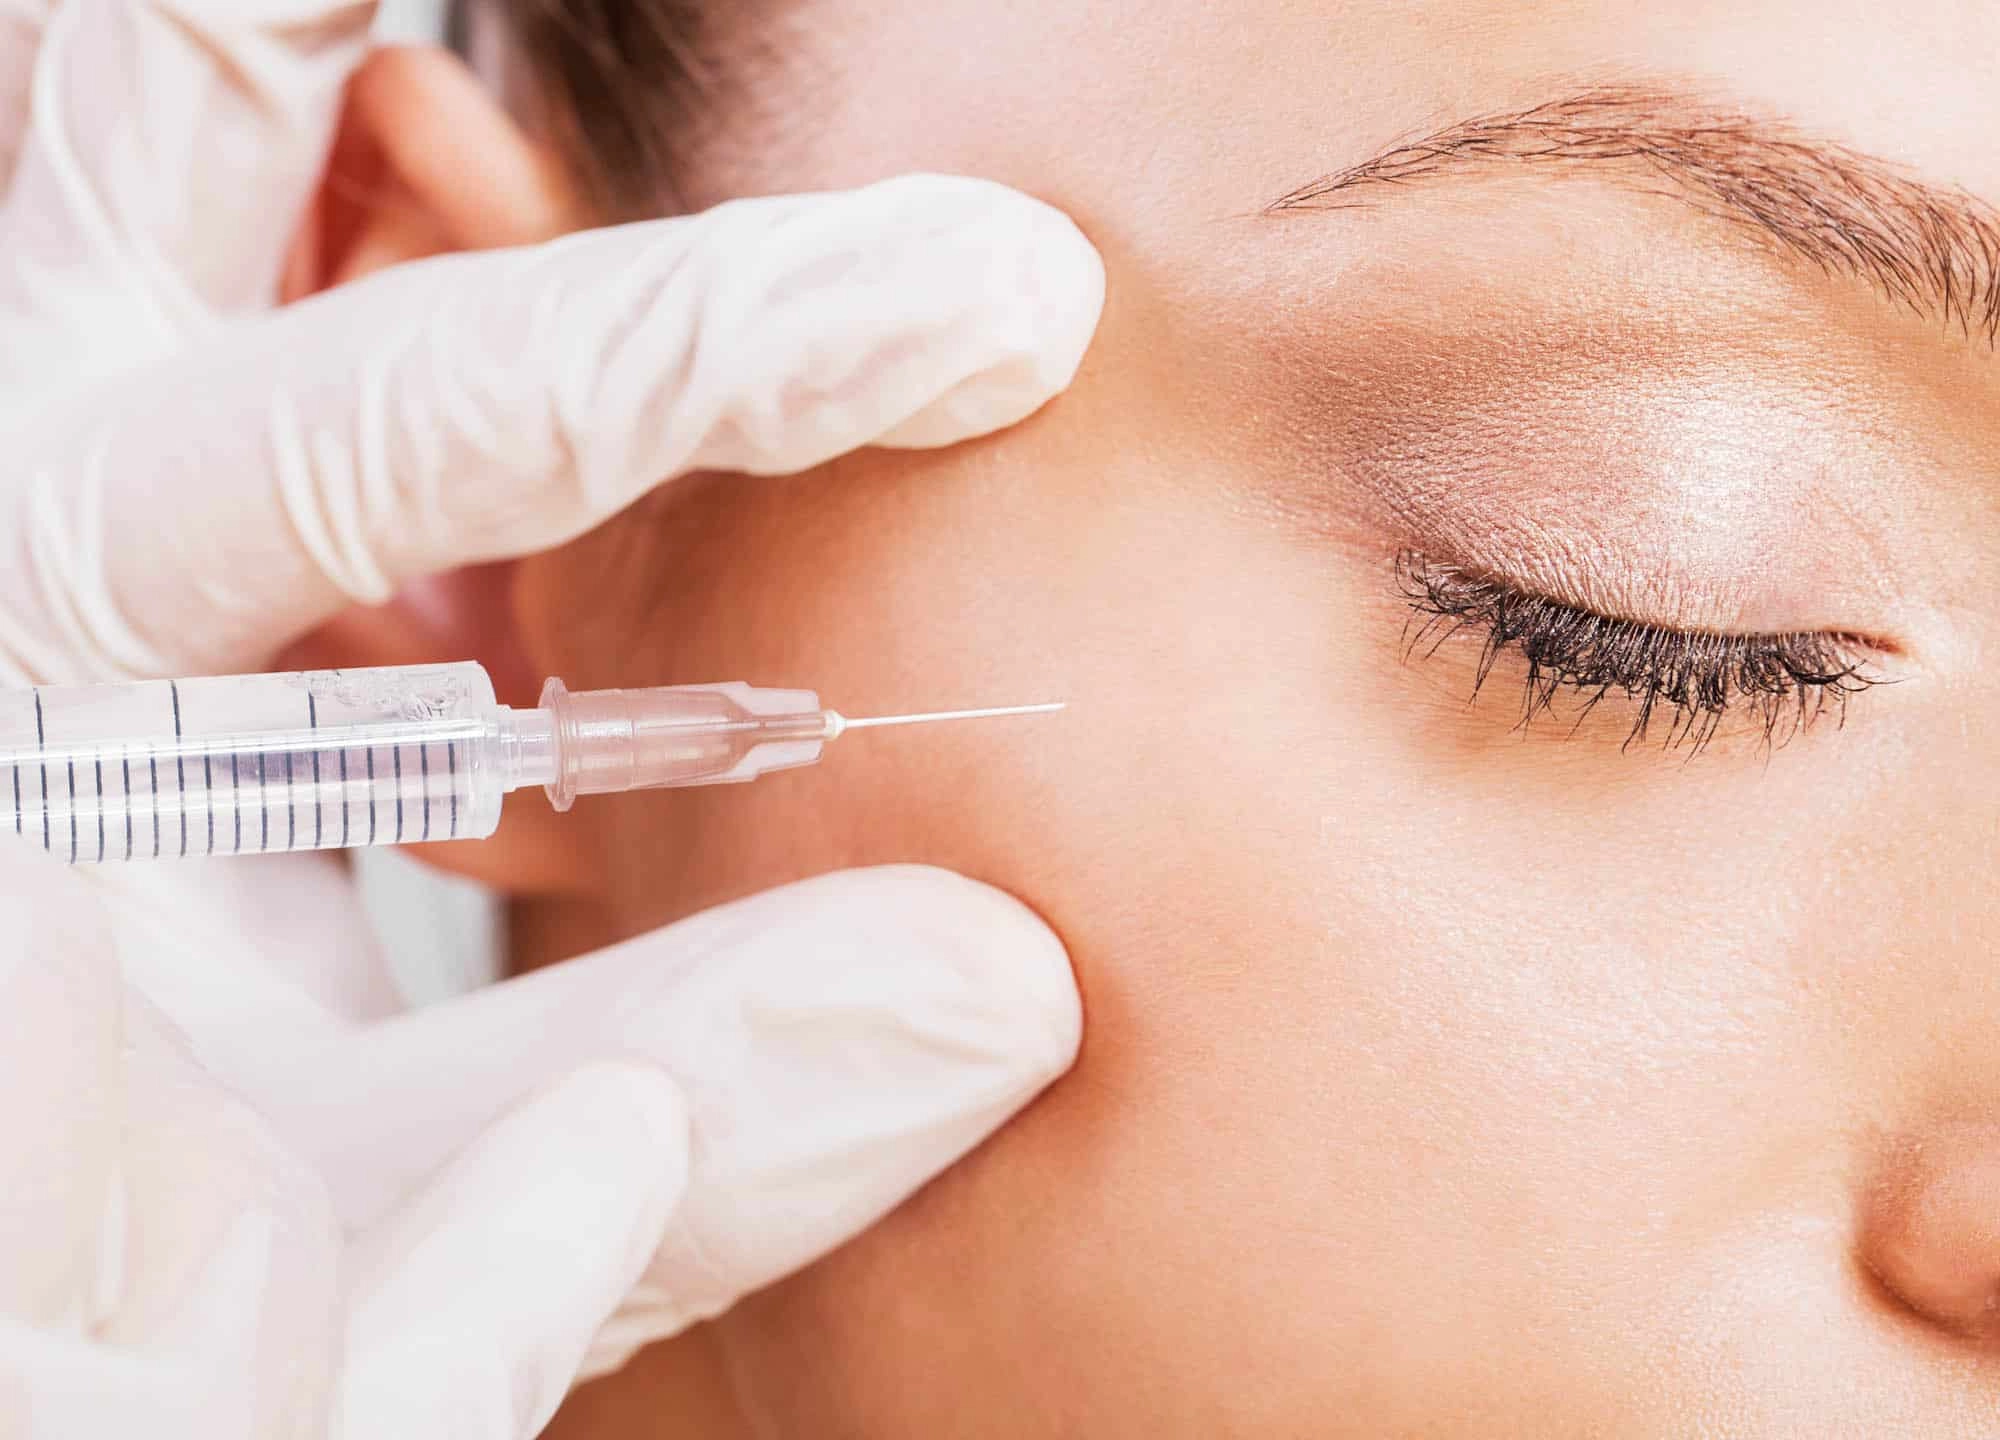 What are the potential risks and side effects of under eye filler injections?